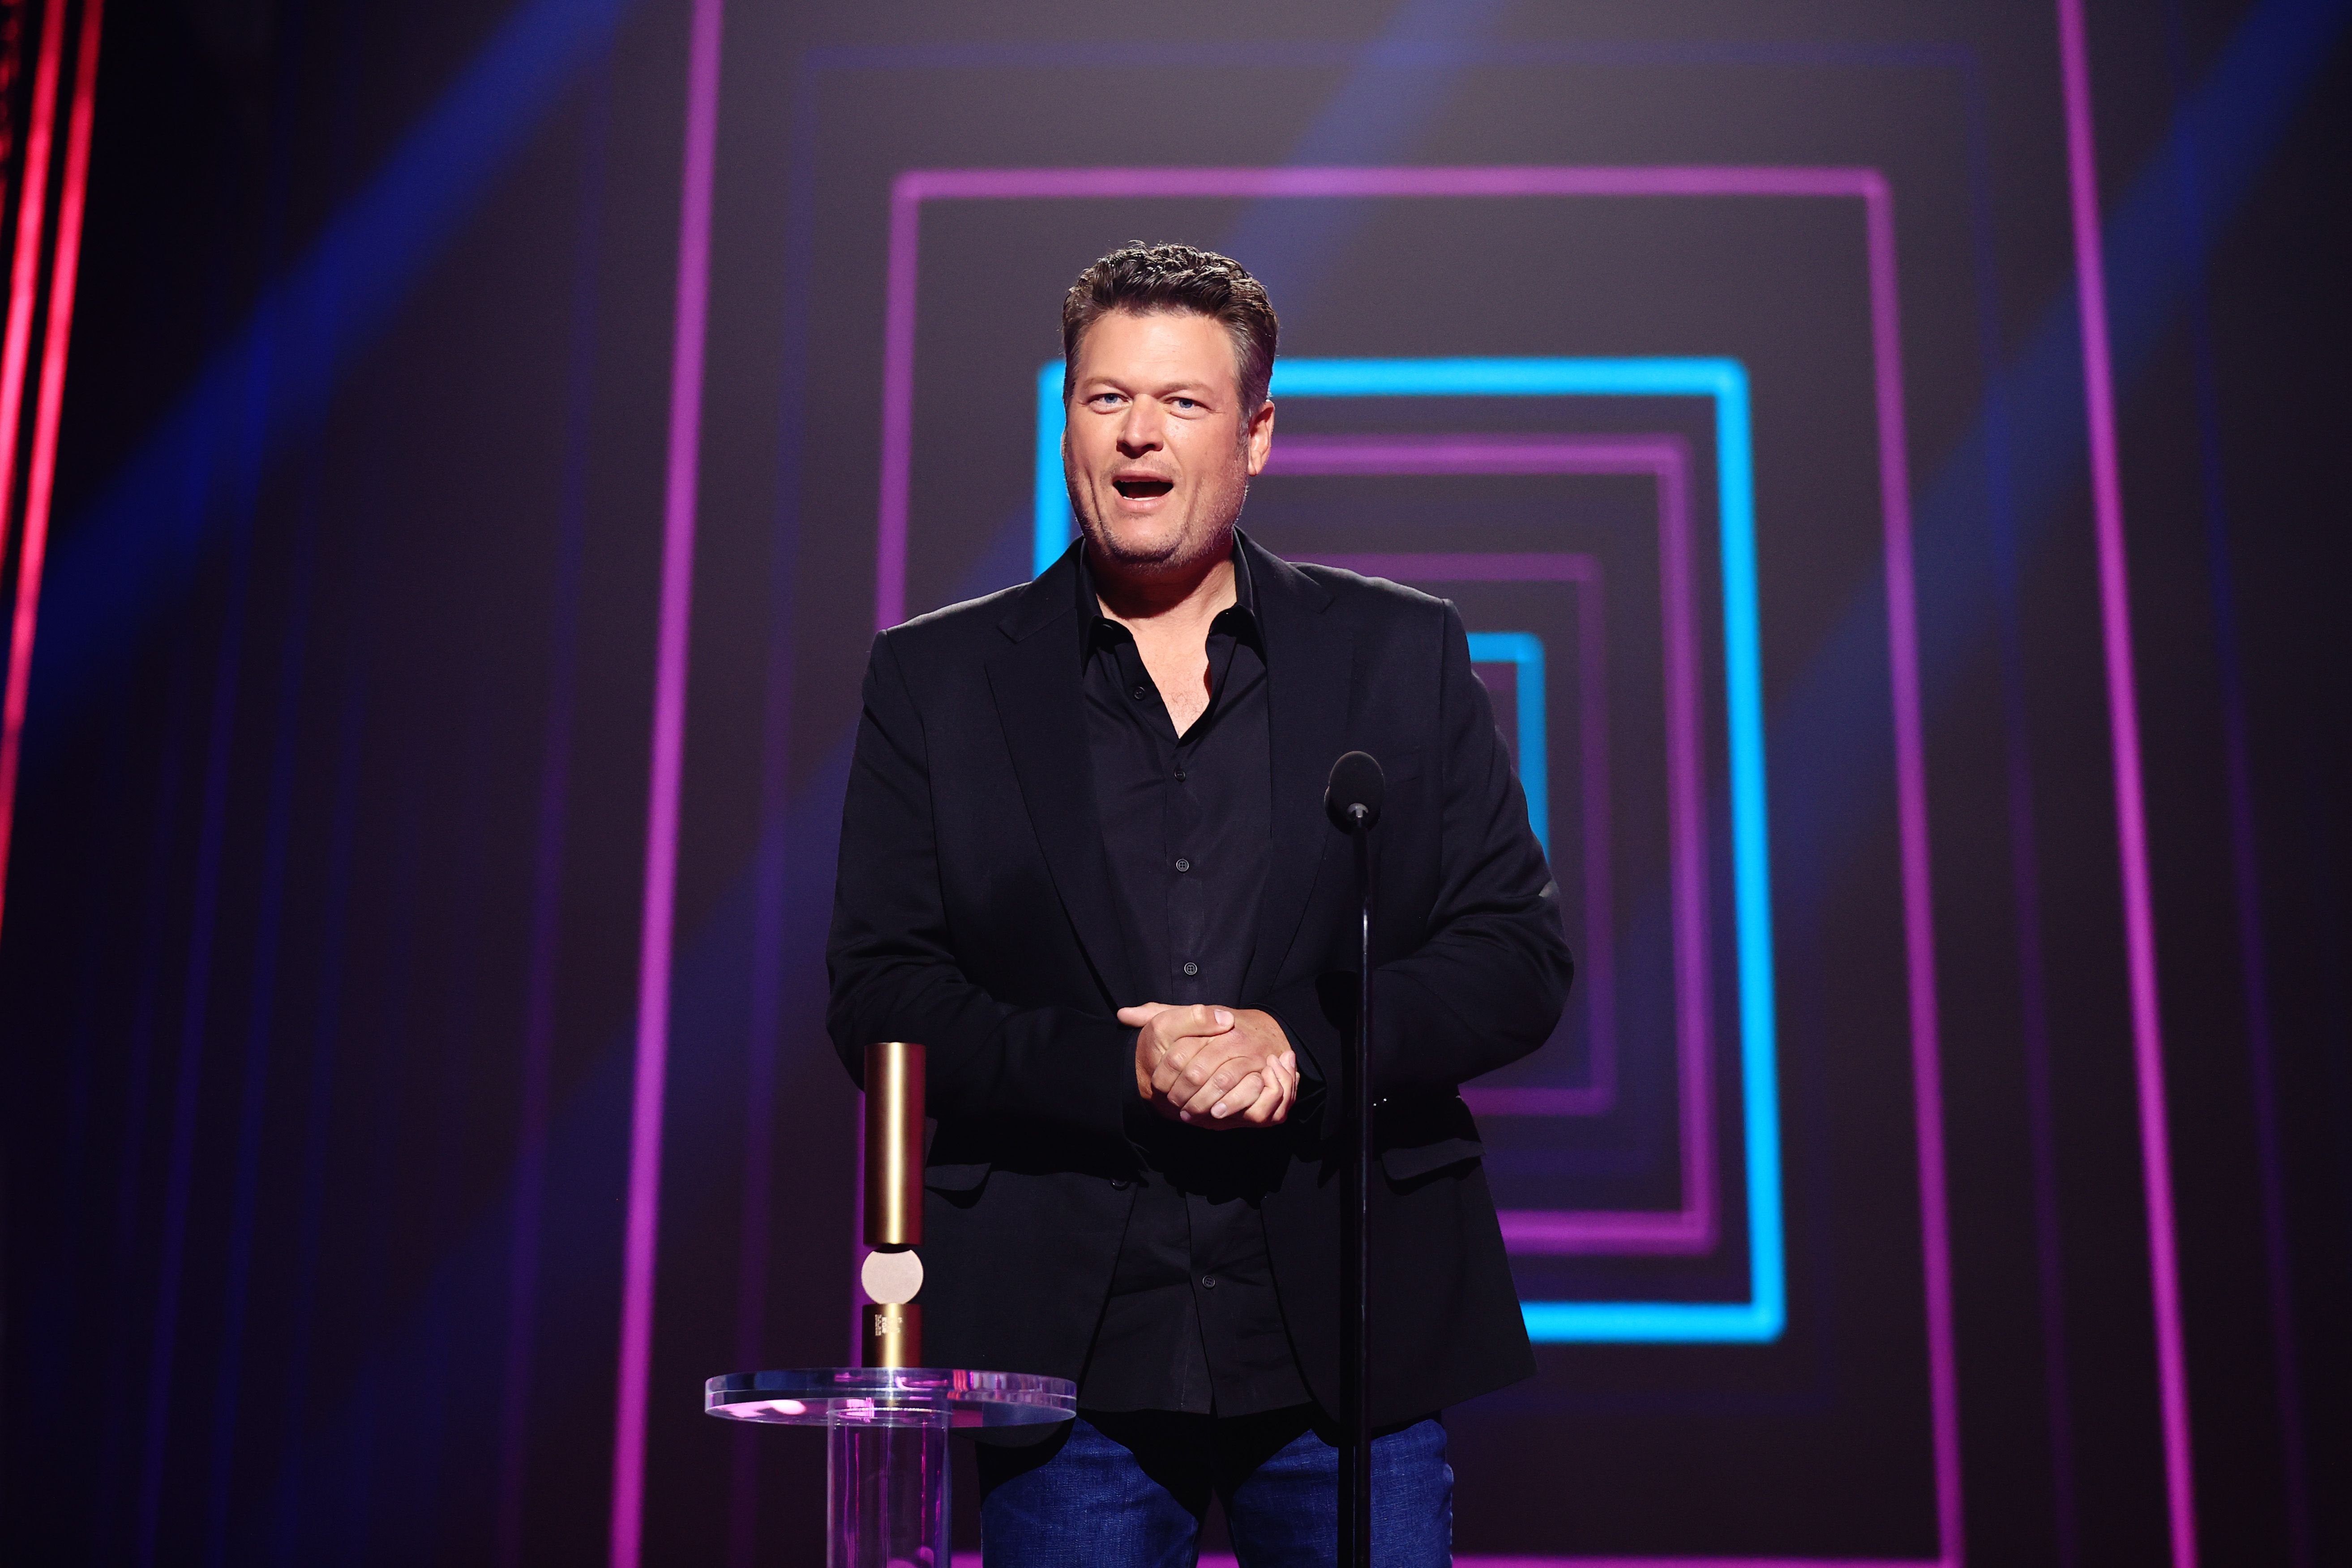 Blake Shelton onstage at the 2020 E! People's Choice Awards on November 15, 2020. | Getty Images